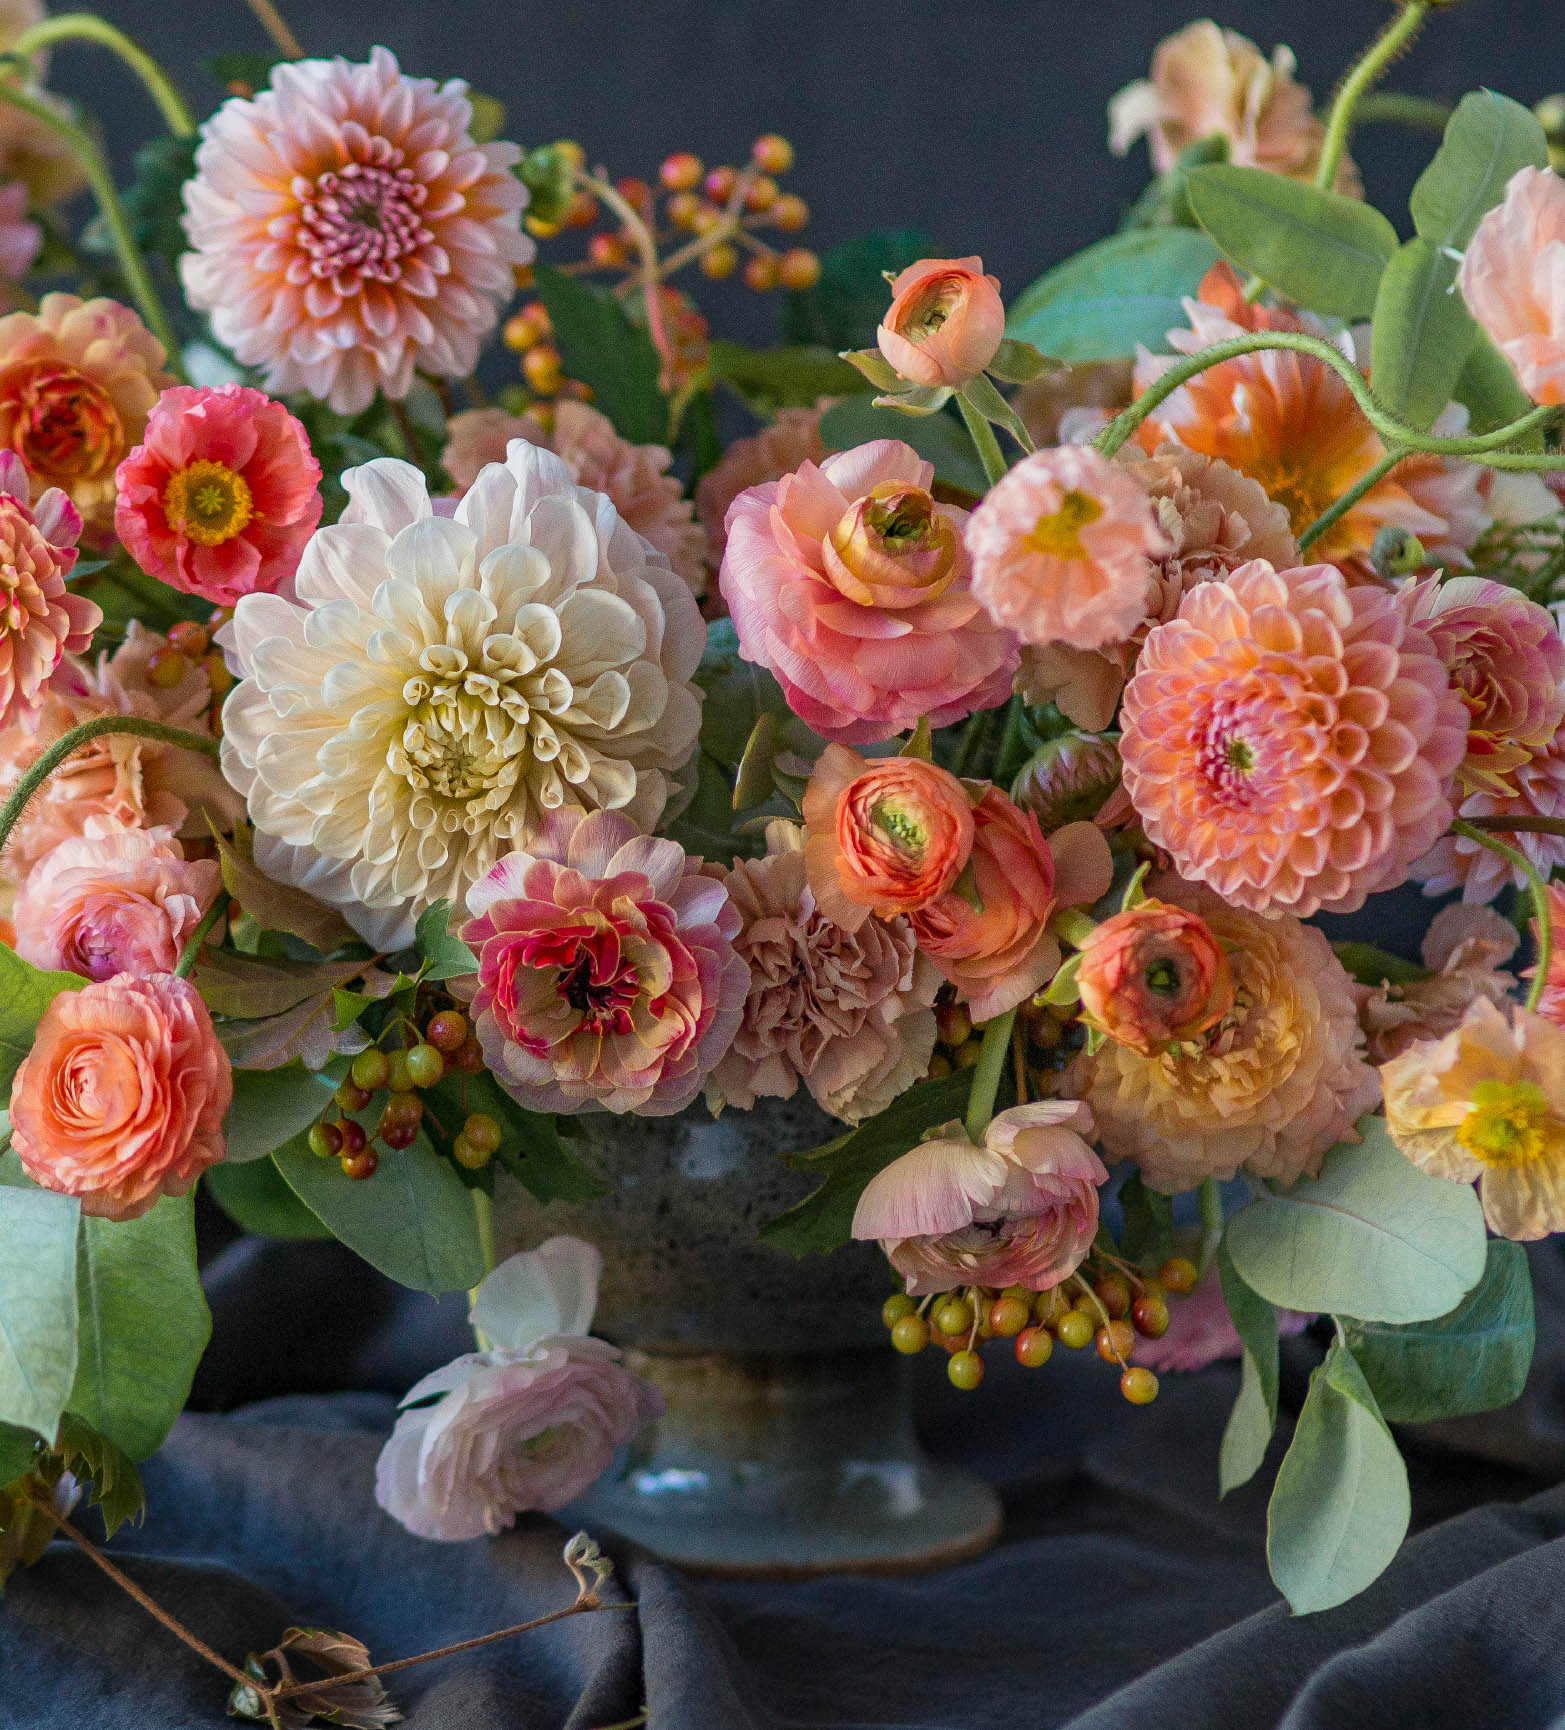 Color me floral stunning monochromatic arrangements for every season - image 3